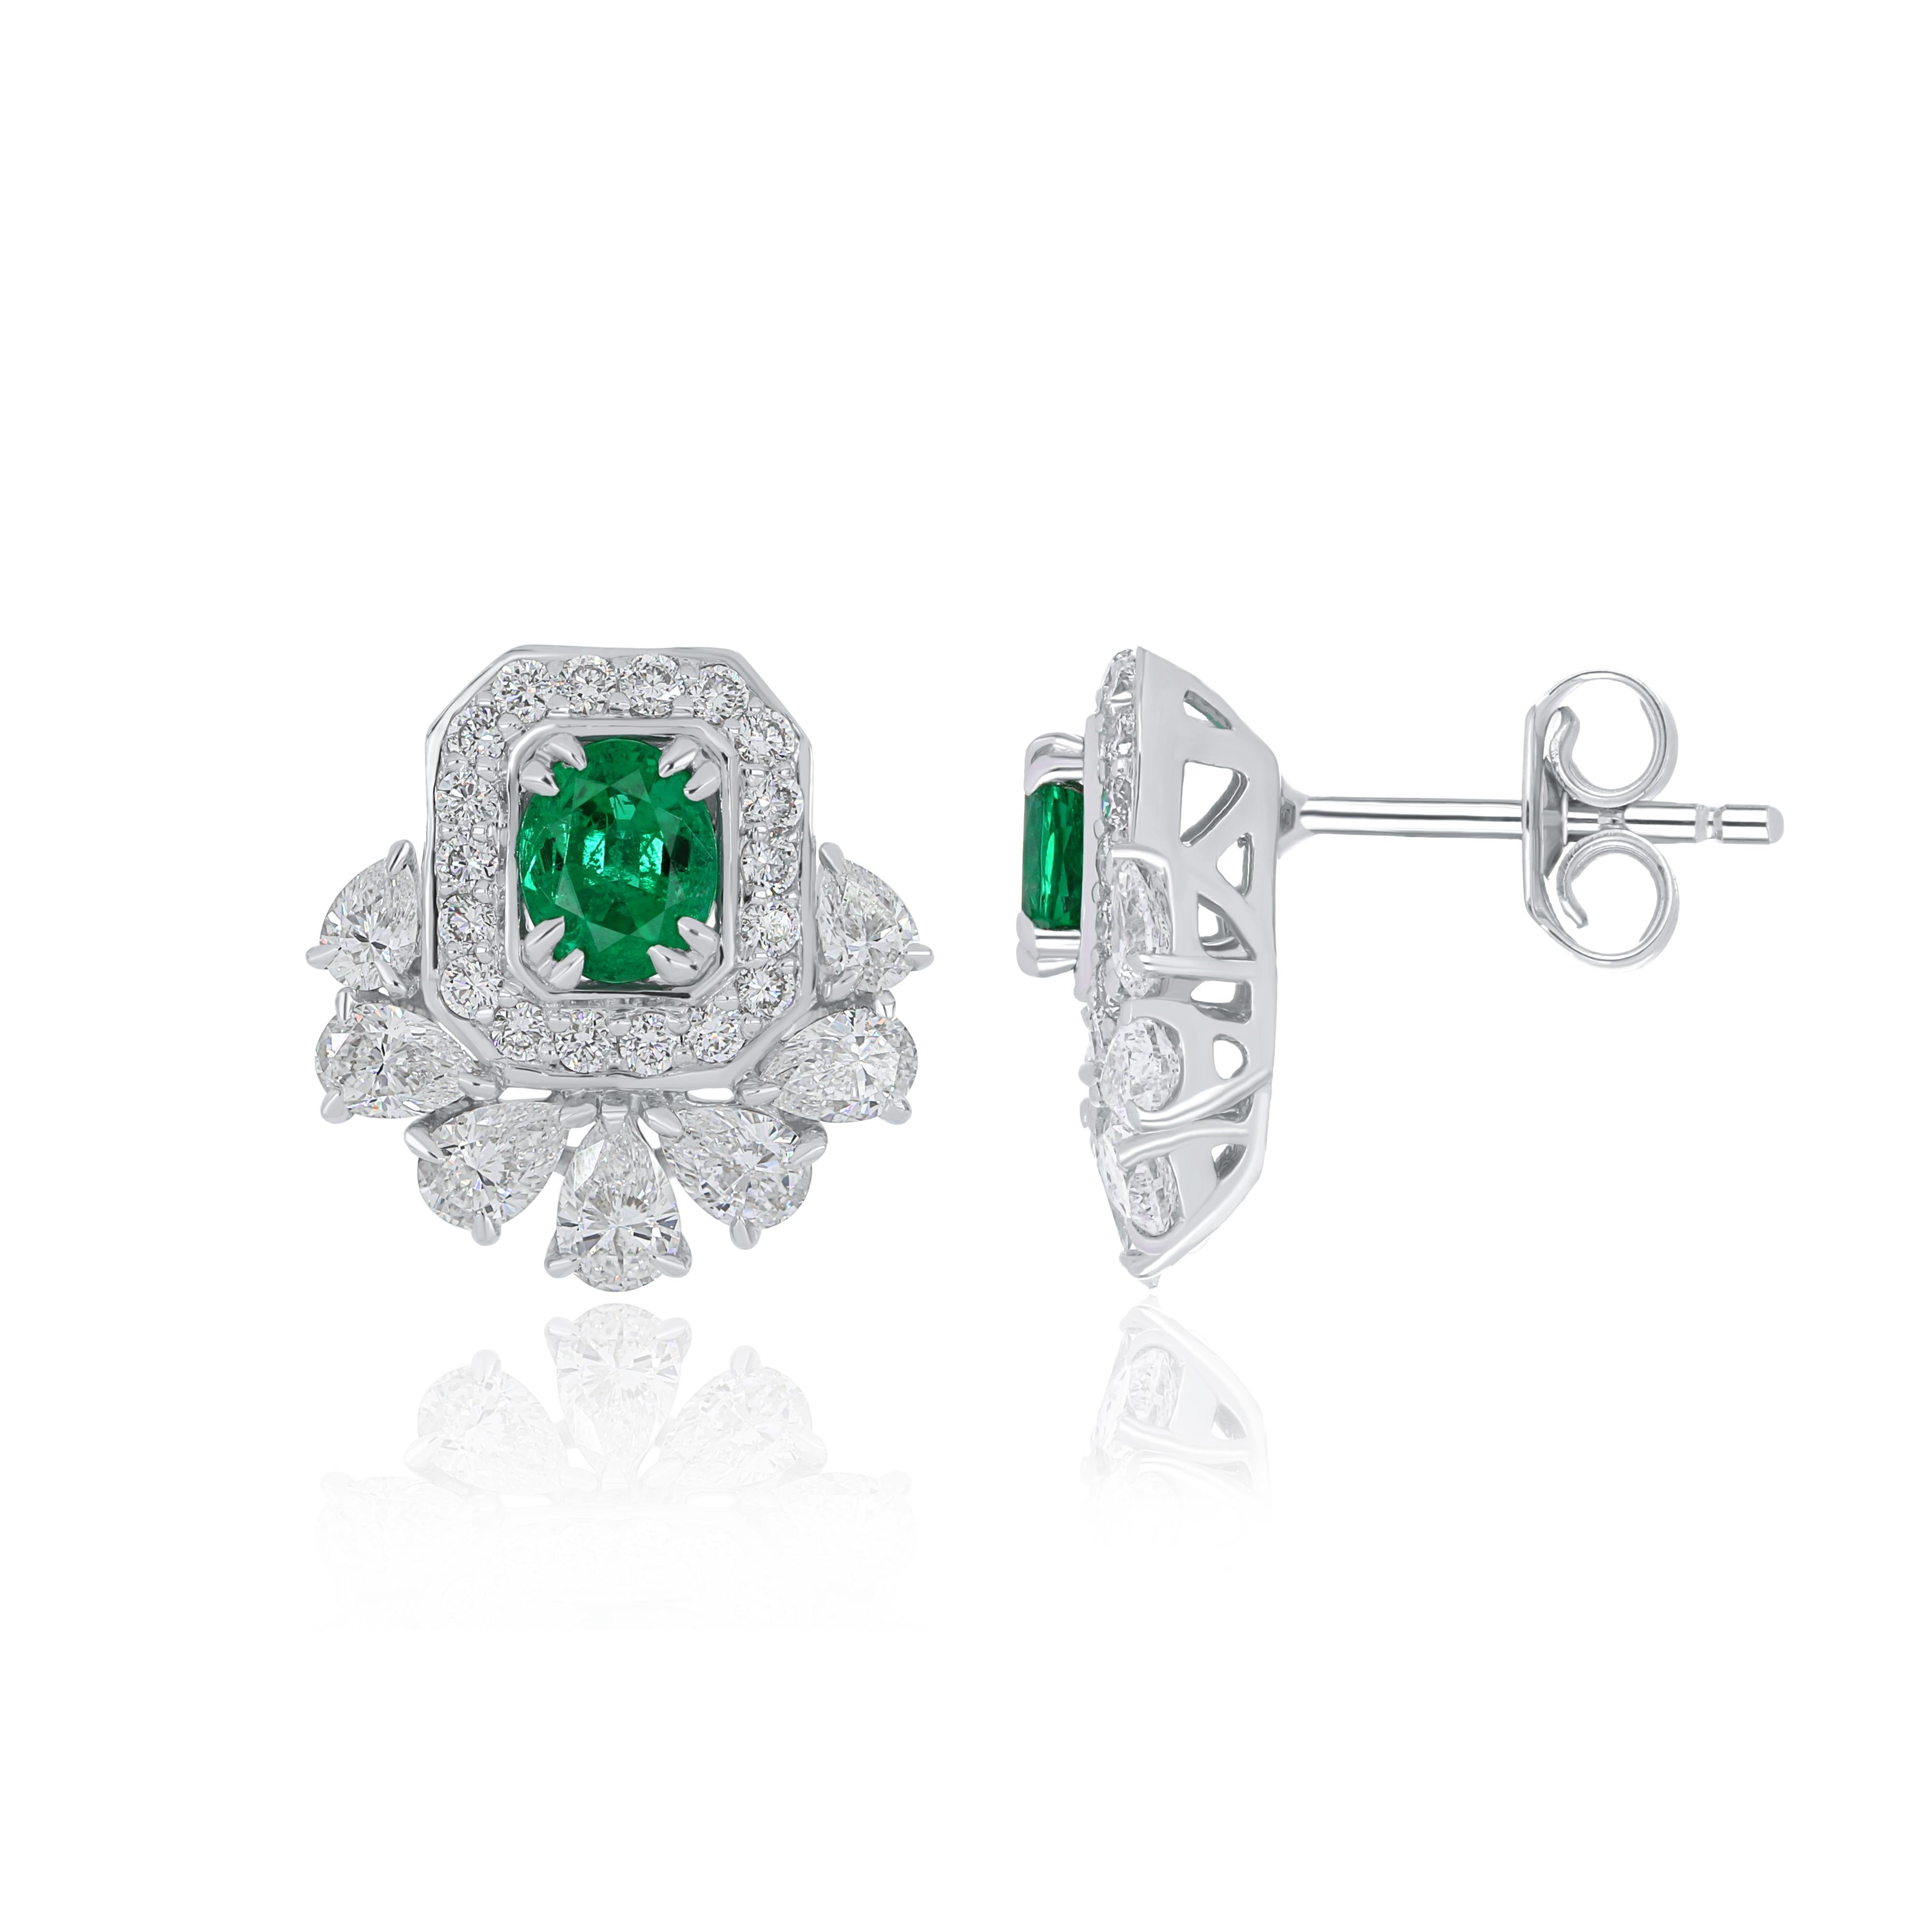 Oval Cut Emerald and Diamond Studded Earrings in 18 Karat White Gold Handcraft Jewelry For Sale